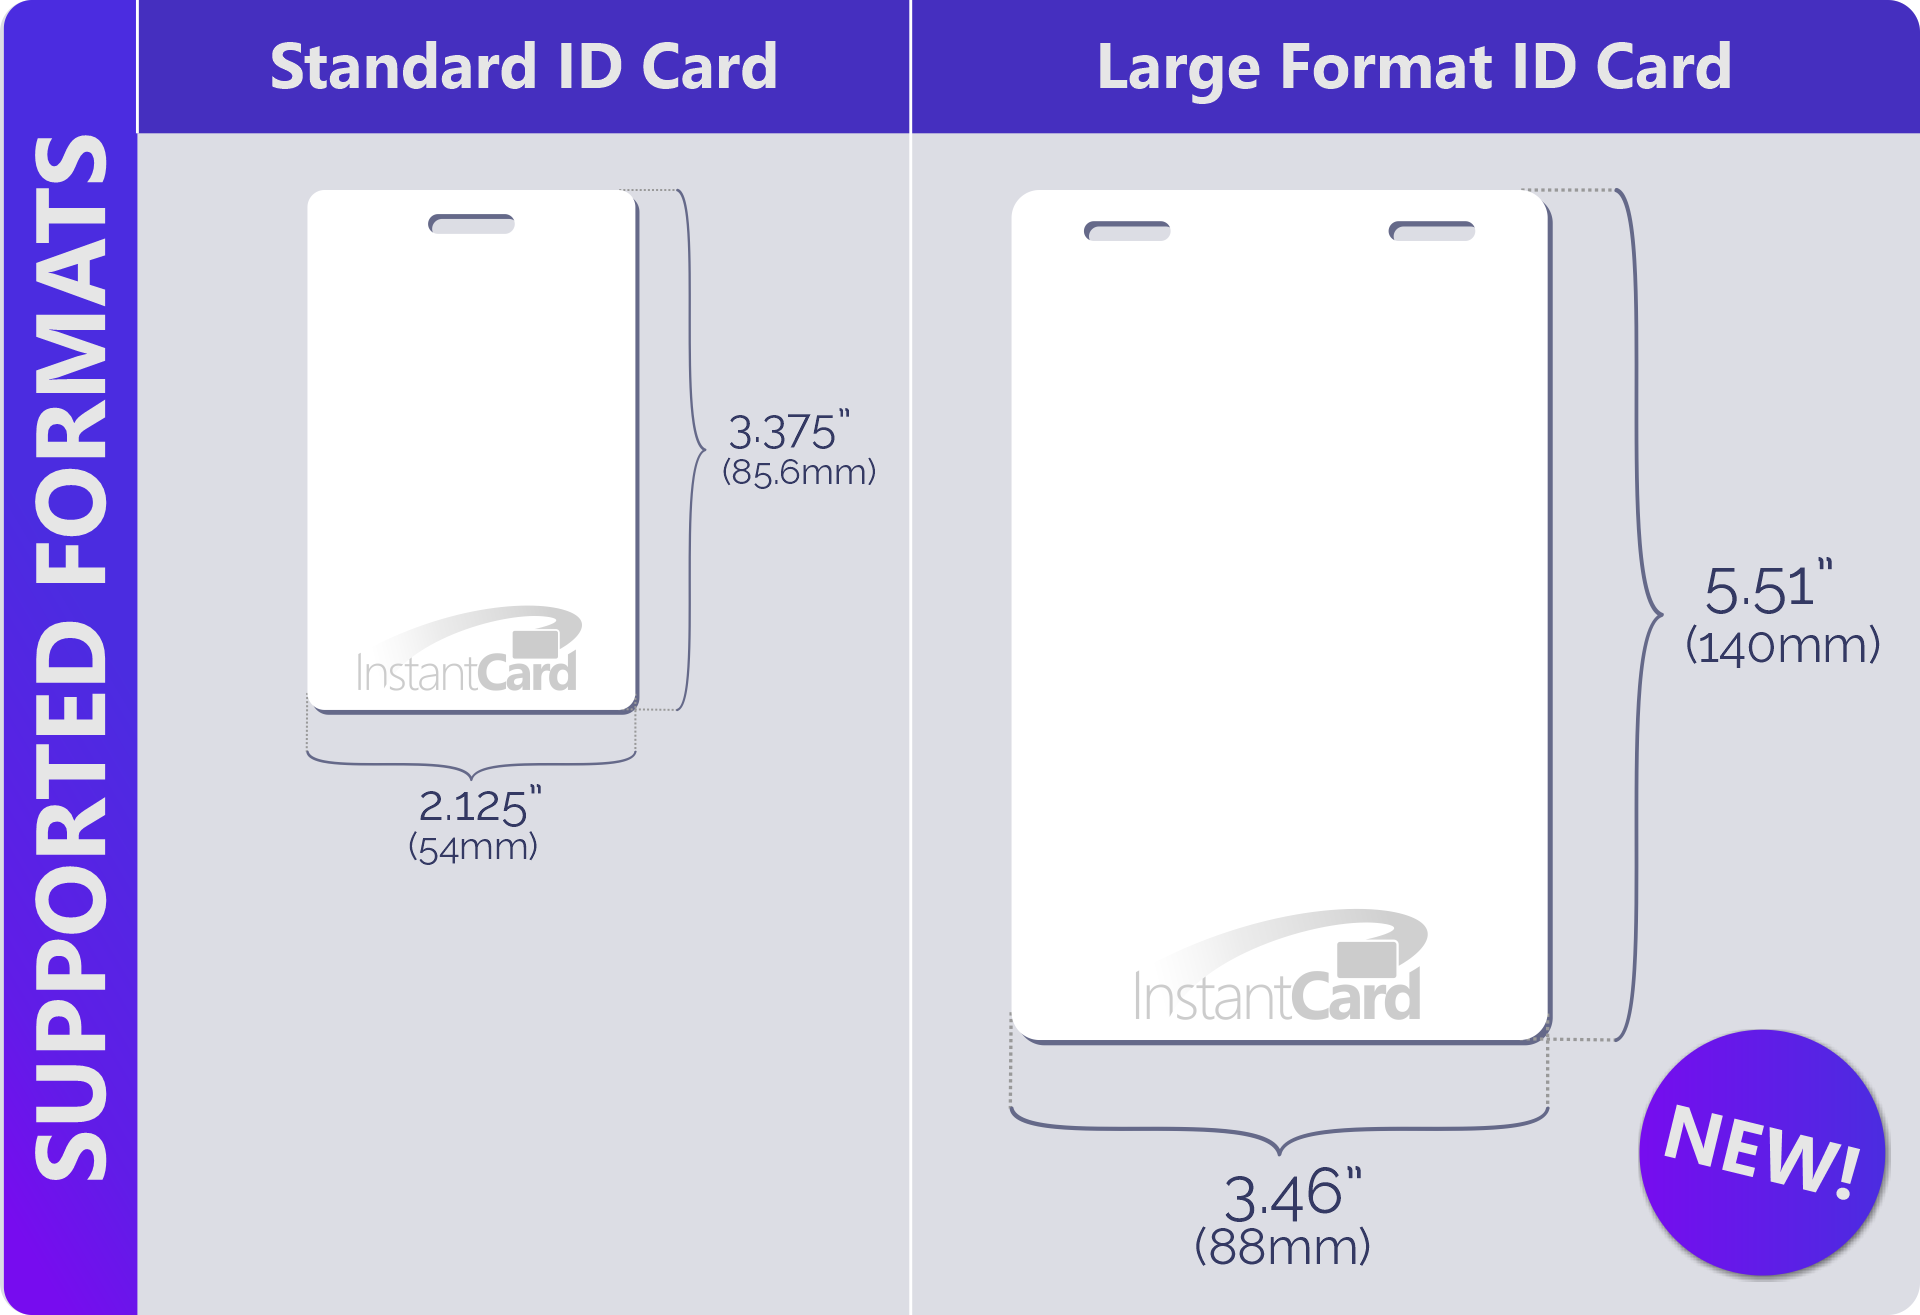 Large Format ID Card Dimensions 